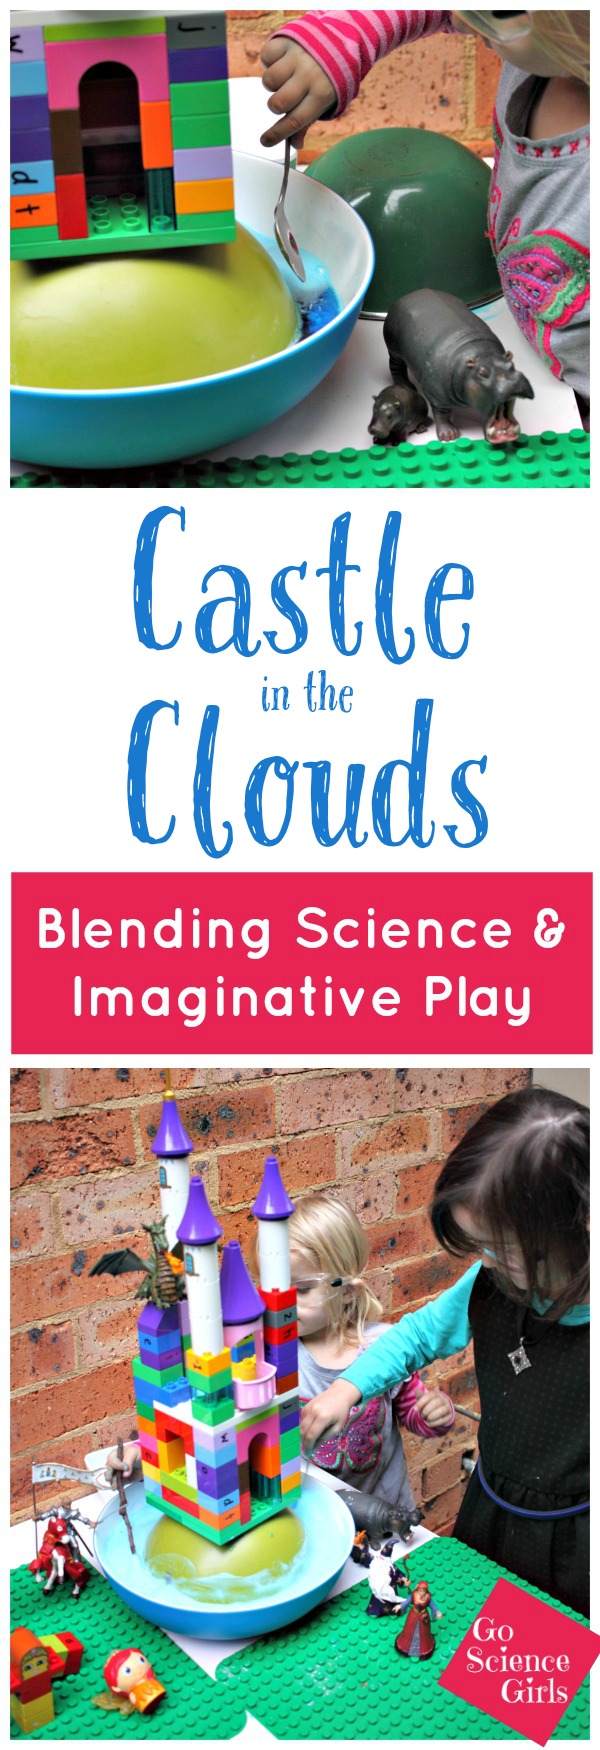 Castle in the clouds - blending science and imaginative small world play, by Go Science Kids